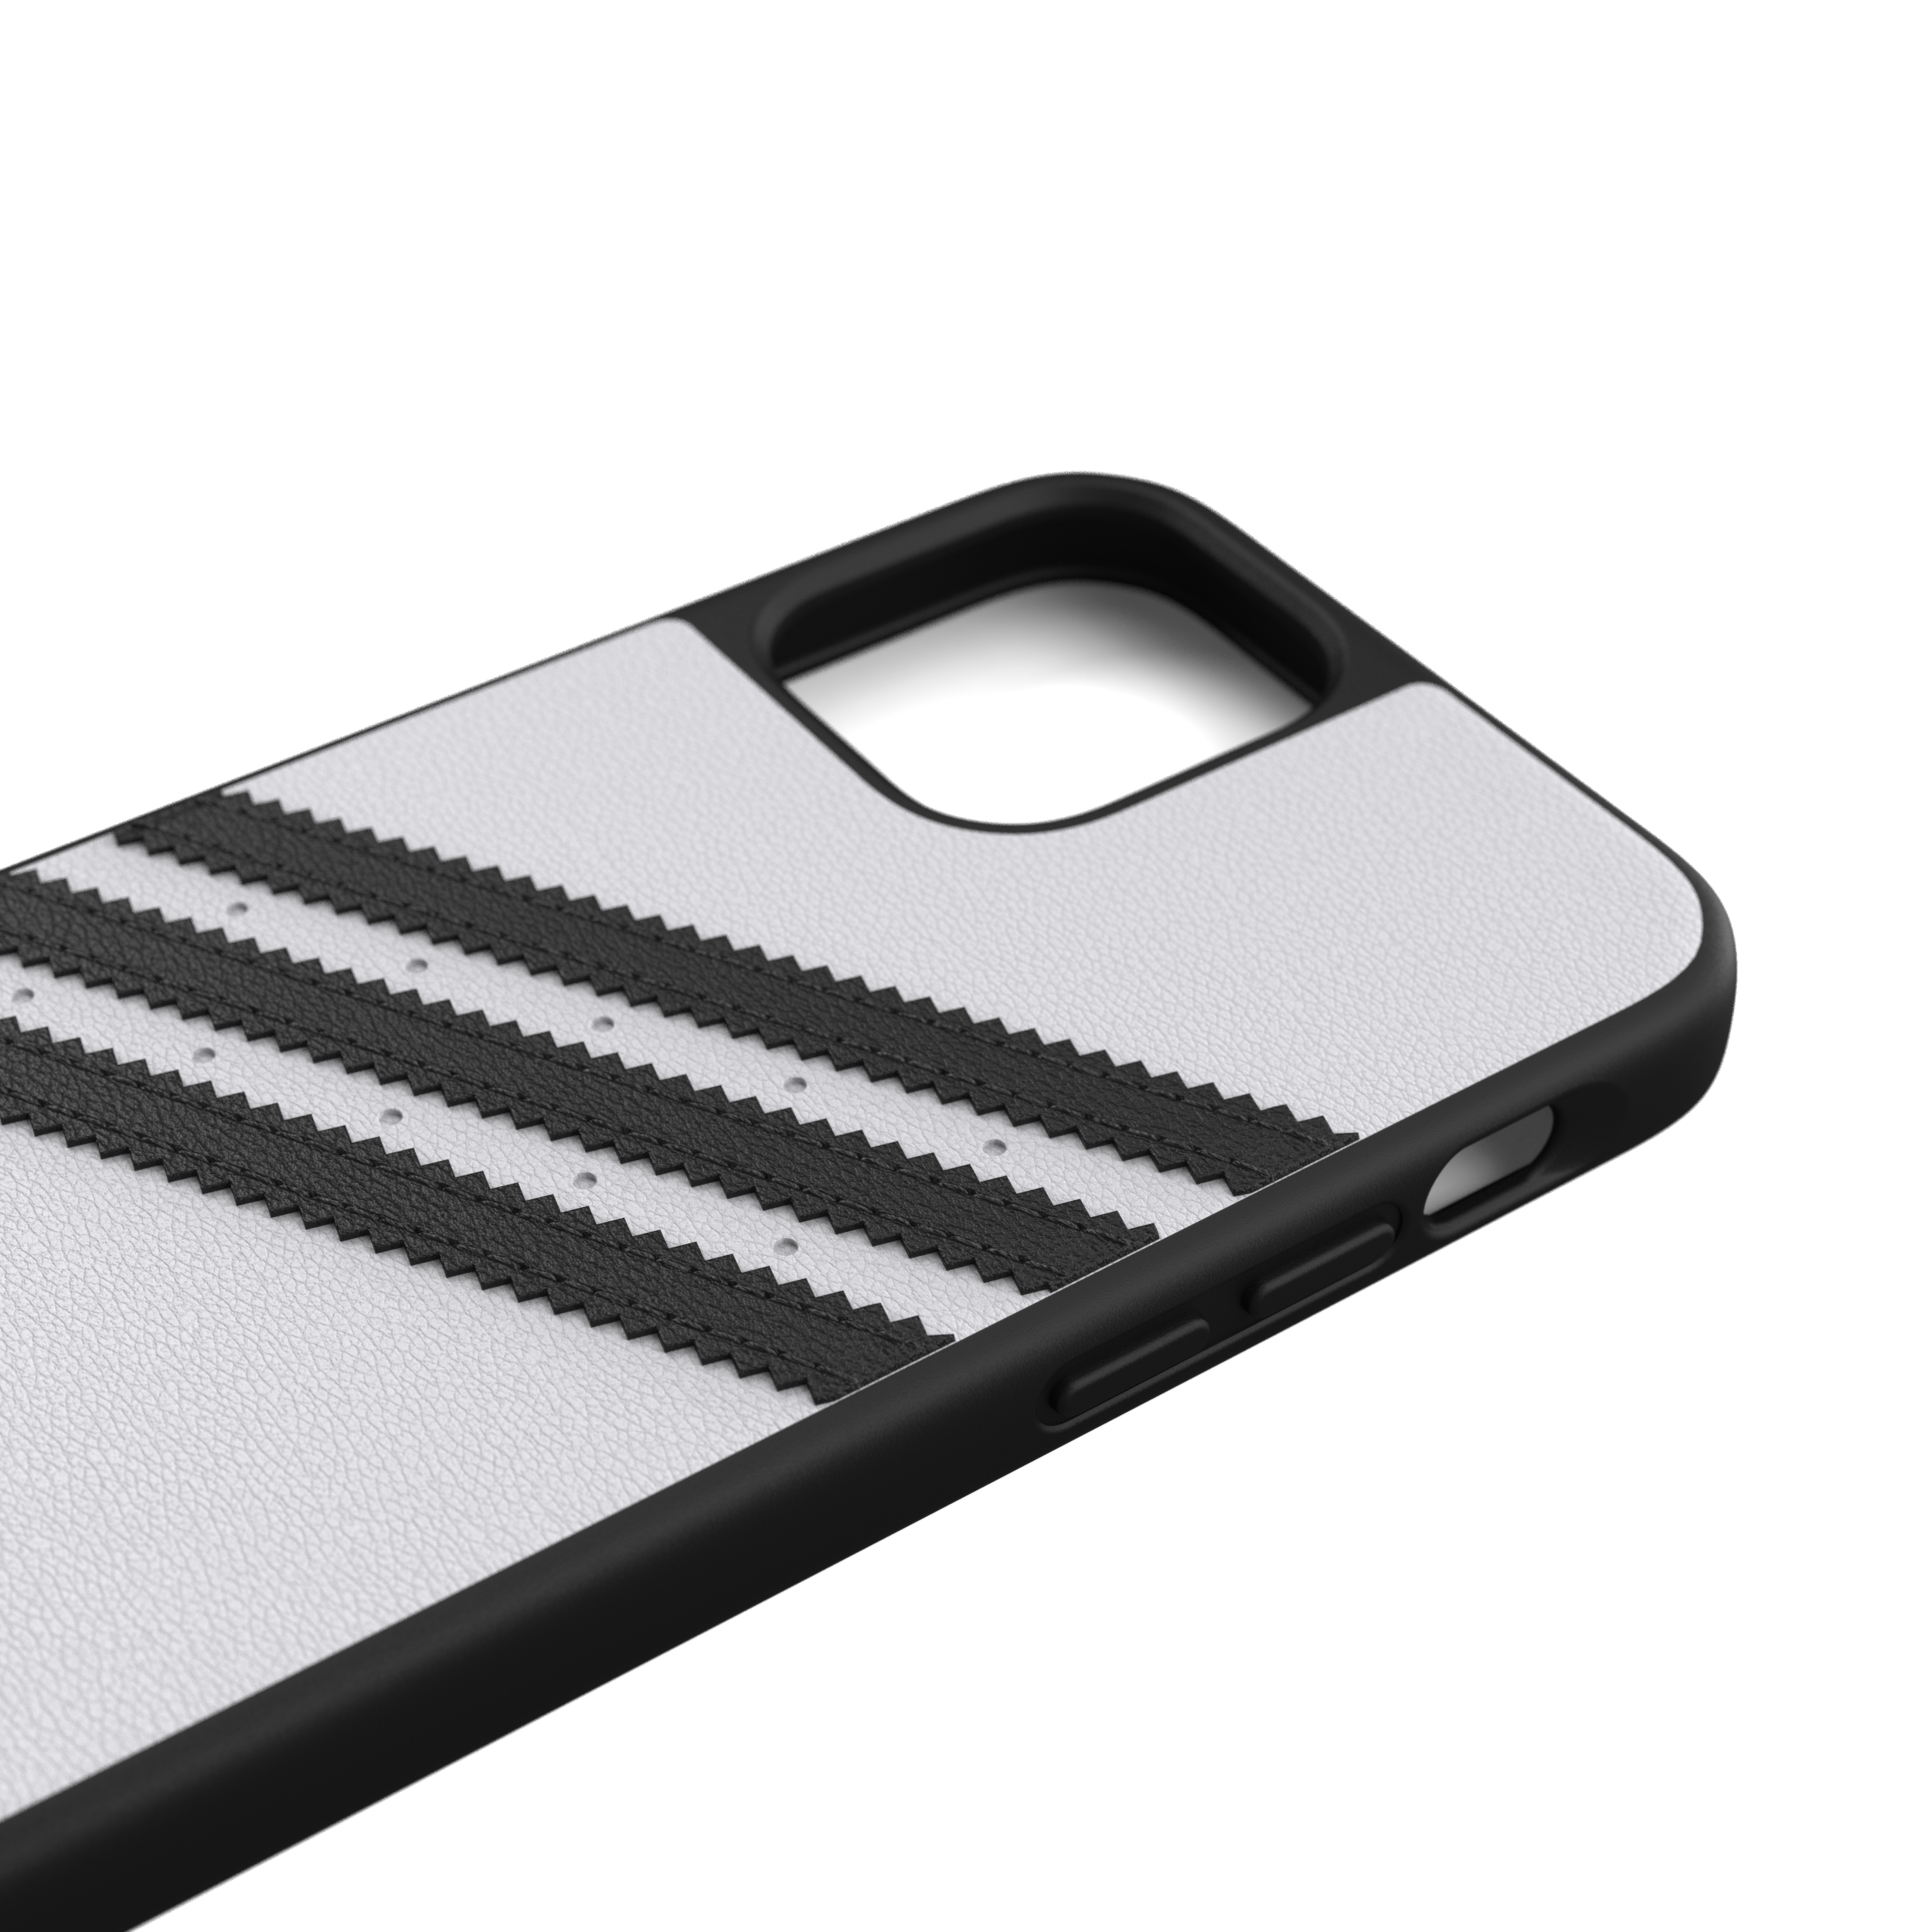 ADIDAS ORIGINALS Moulded Case, Backcover, iPhone Pro, 12, Weiß/Schwarz 12 iPhone Apple